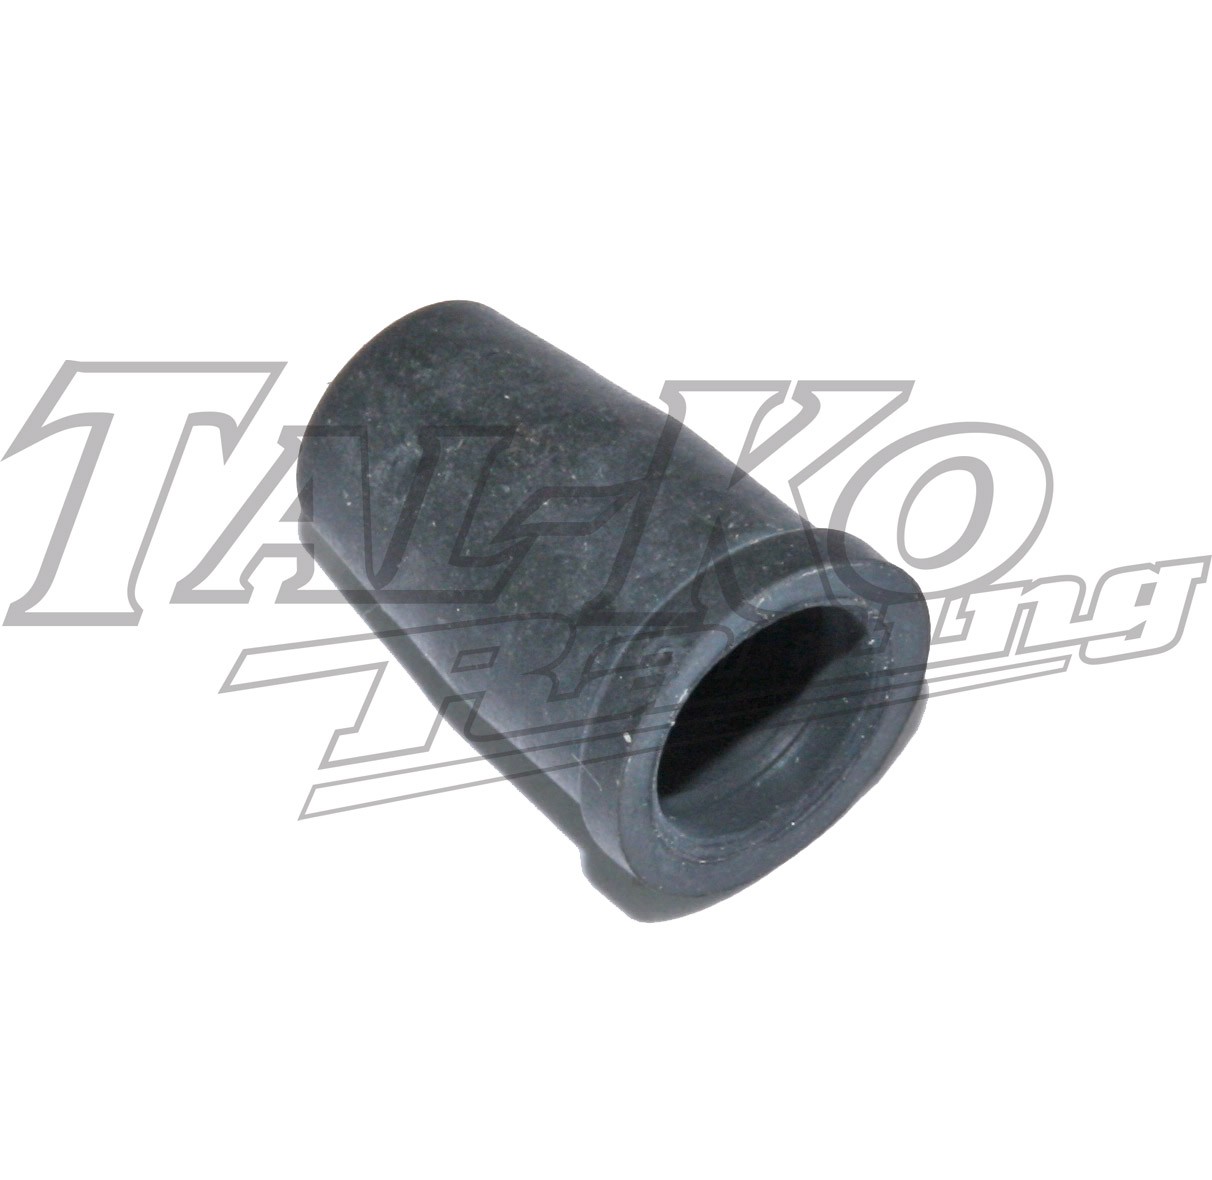 TKM BT82 PVL RUBBER COVER